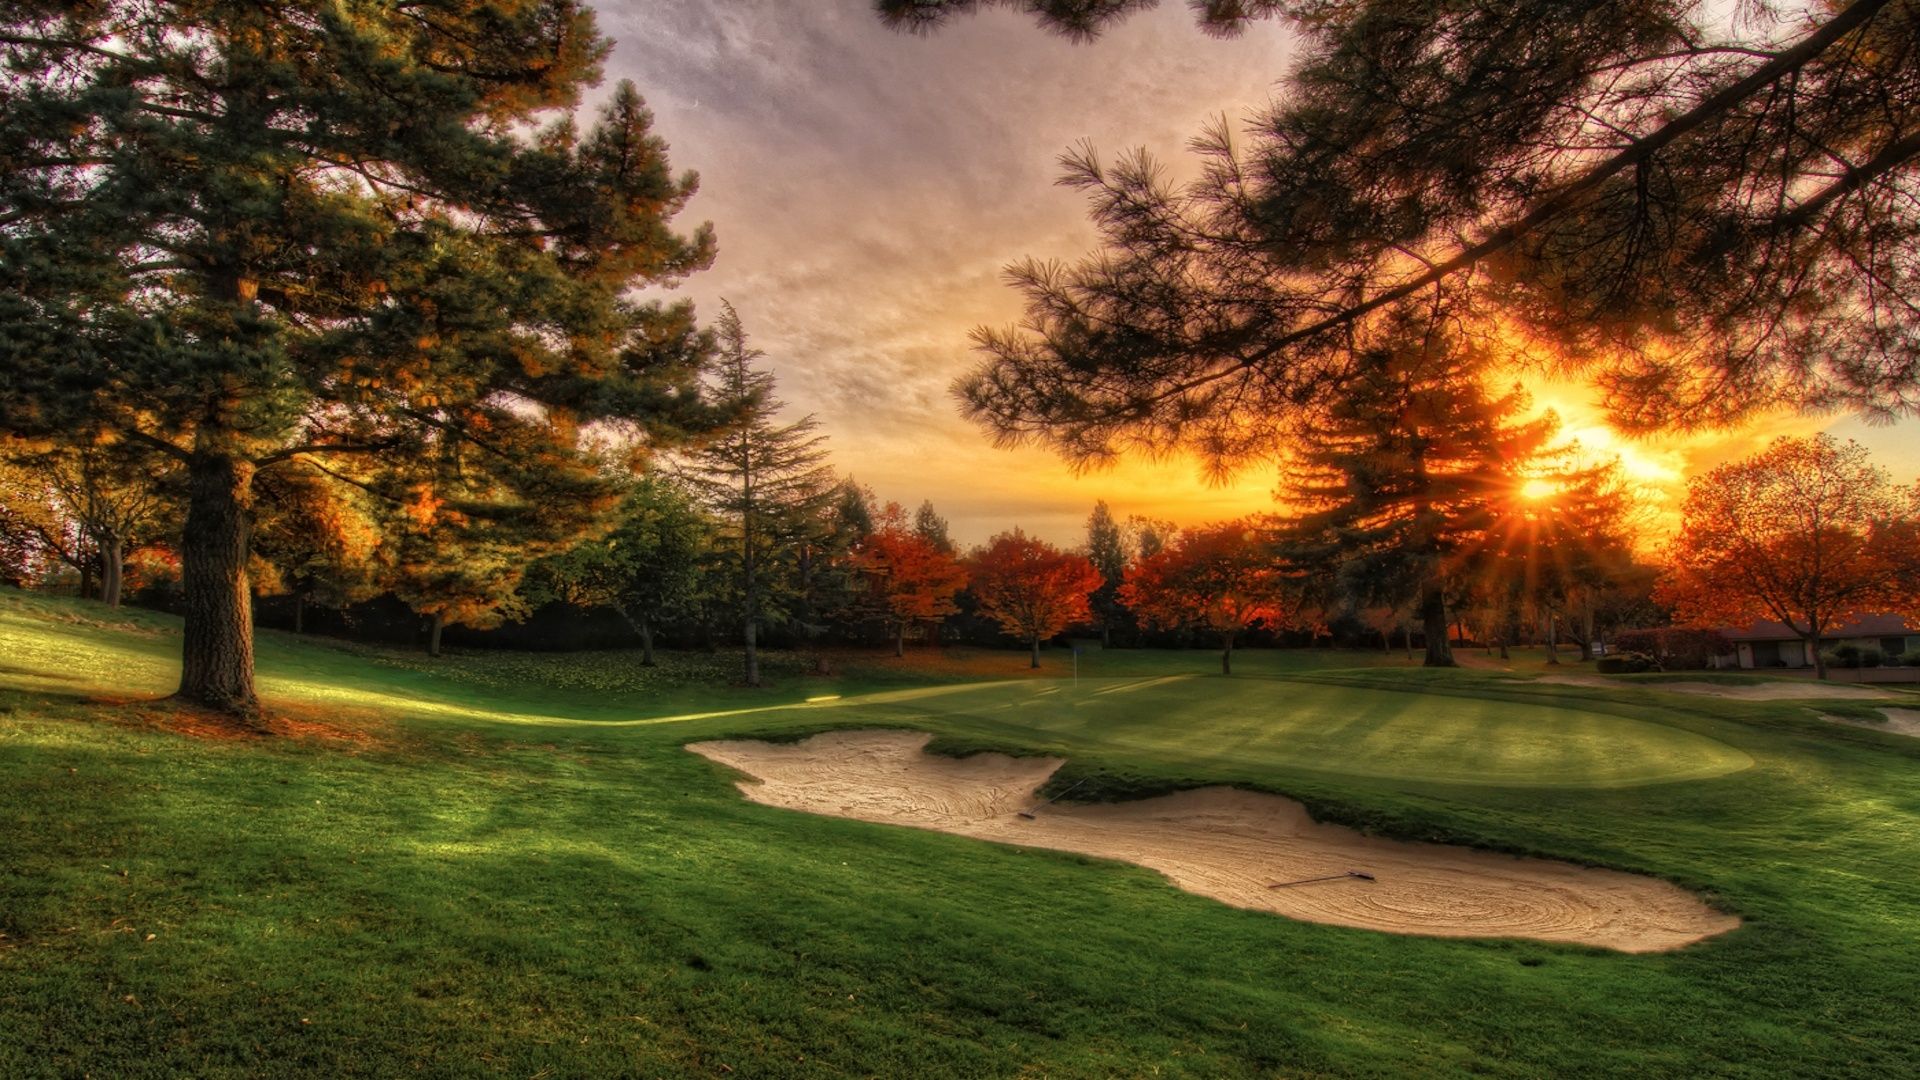 Golf Course HD Wallpaper Golf Course Pictures Cool Wallpapers